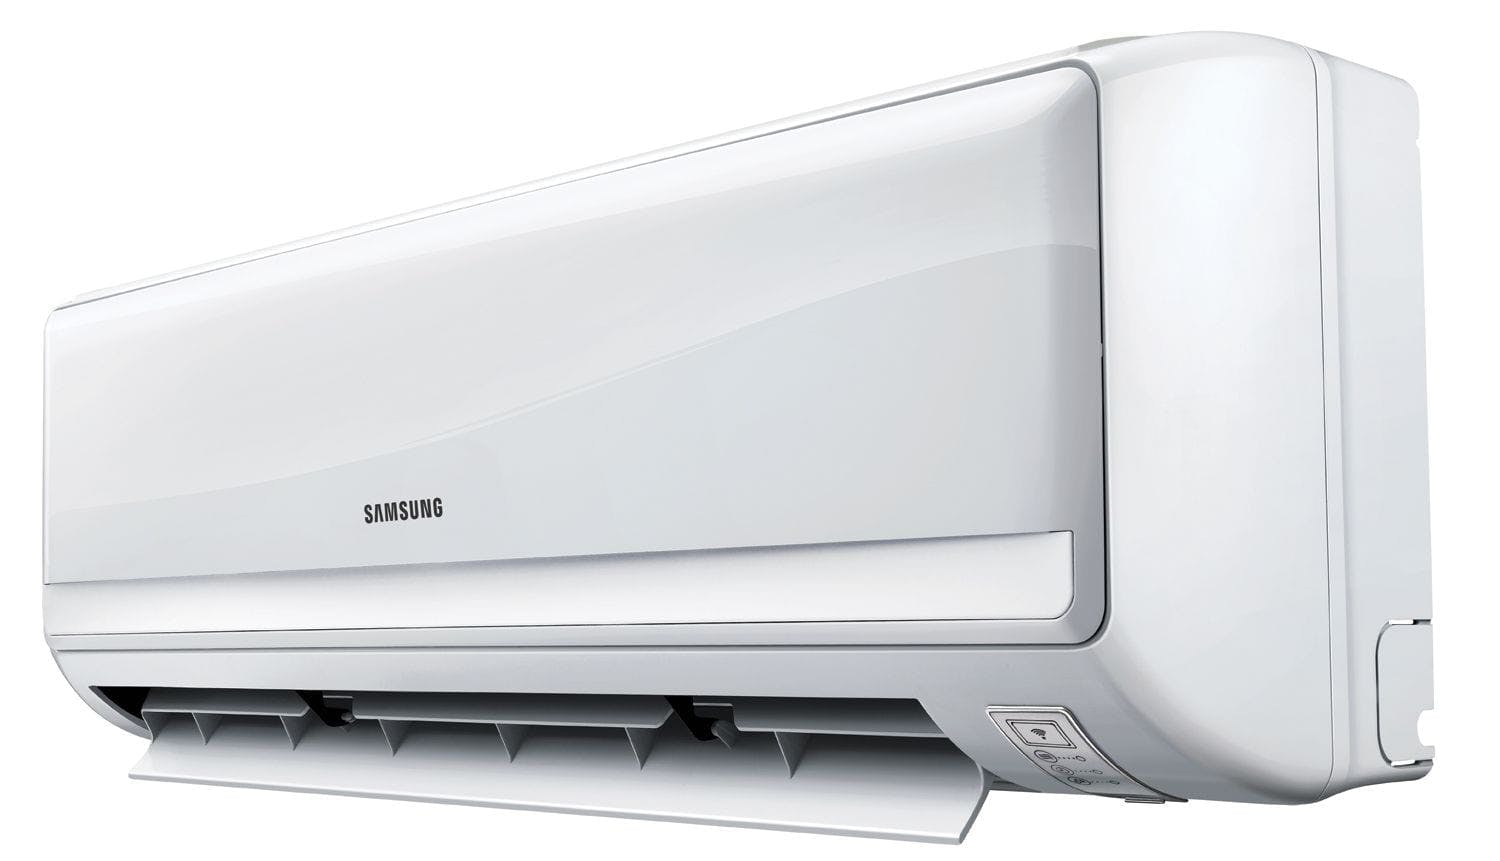 Samsung brand for air conditioning